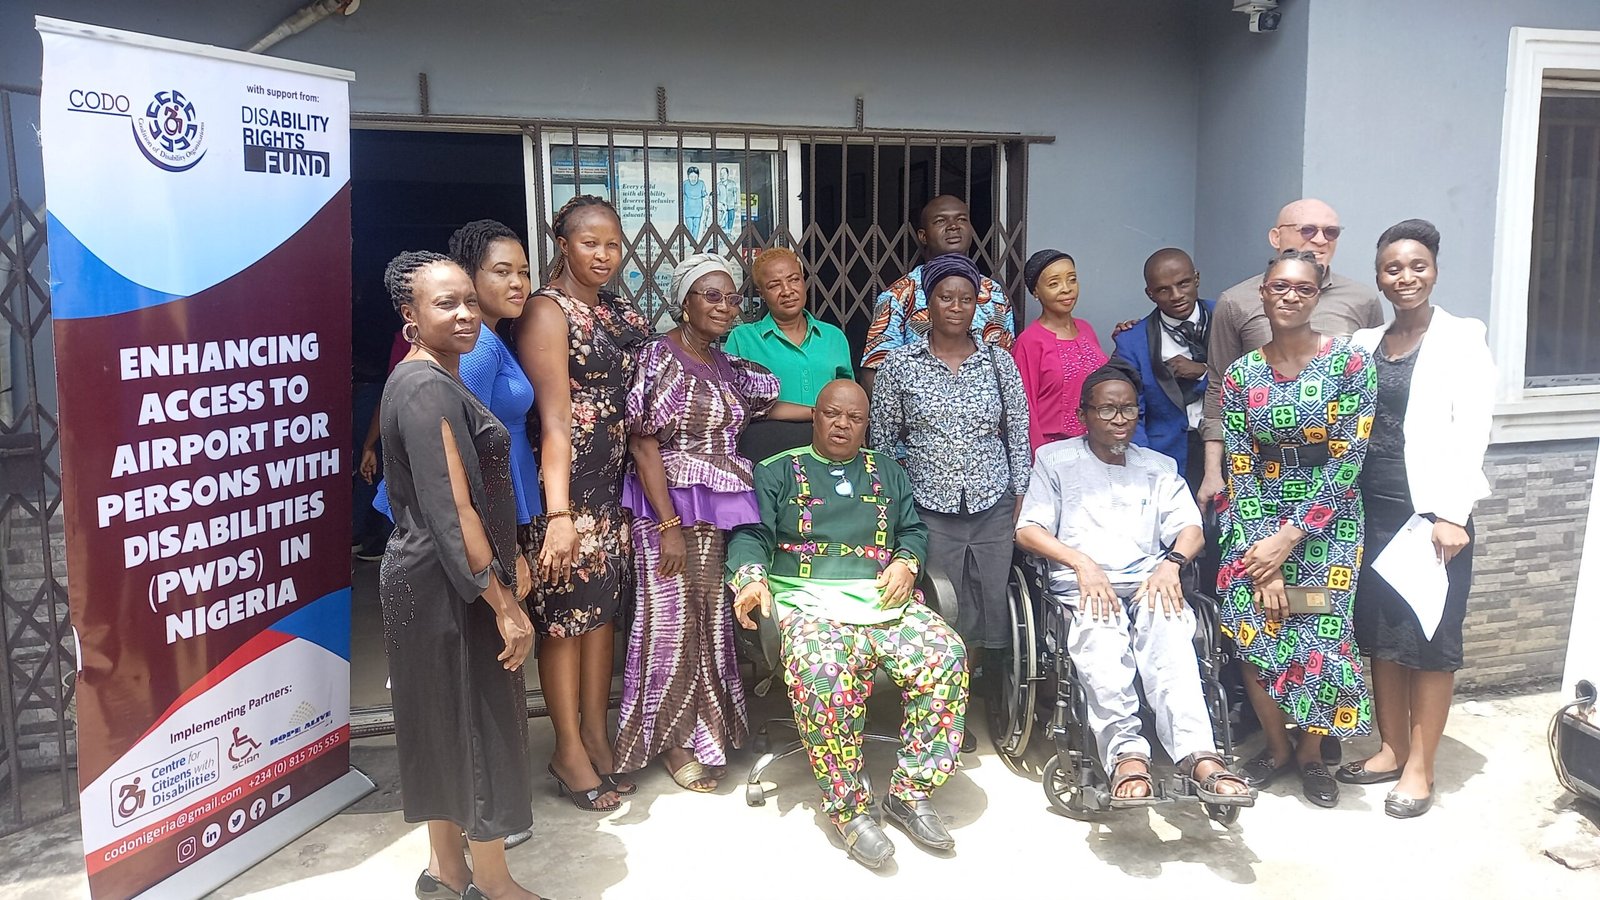  Renewing hope for Persons with Disabilities